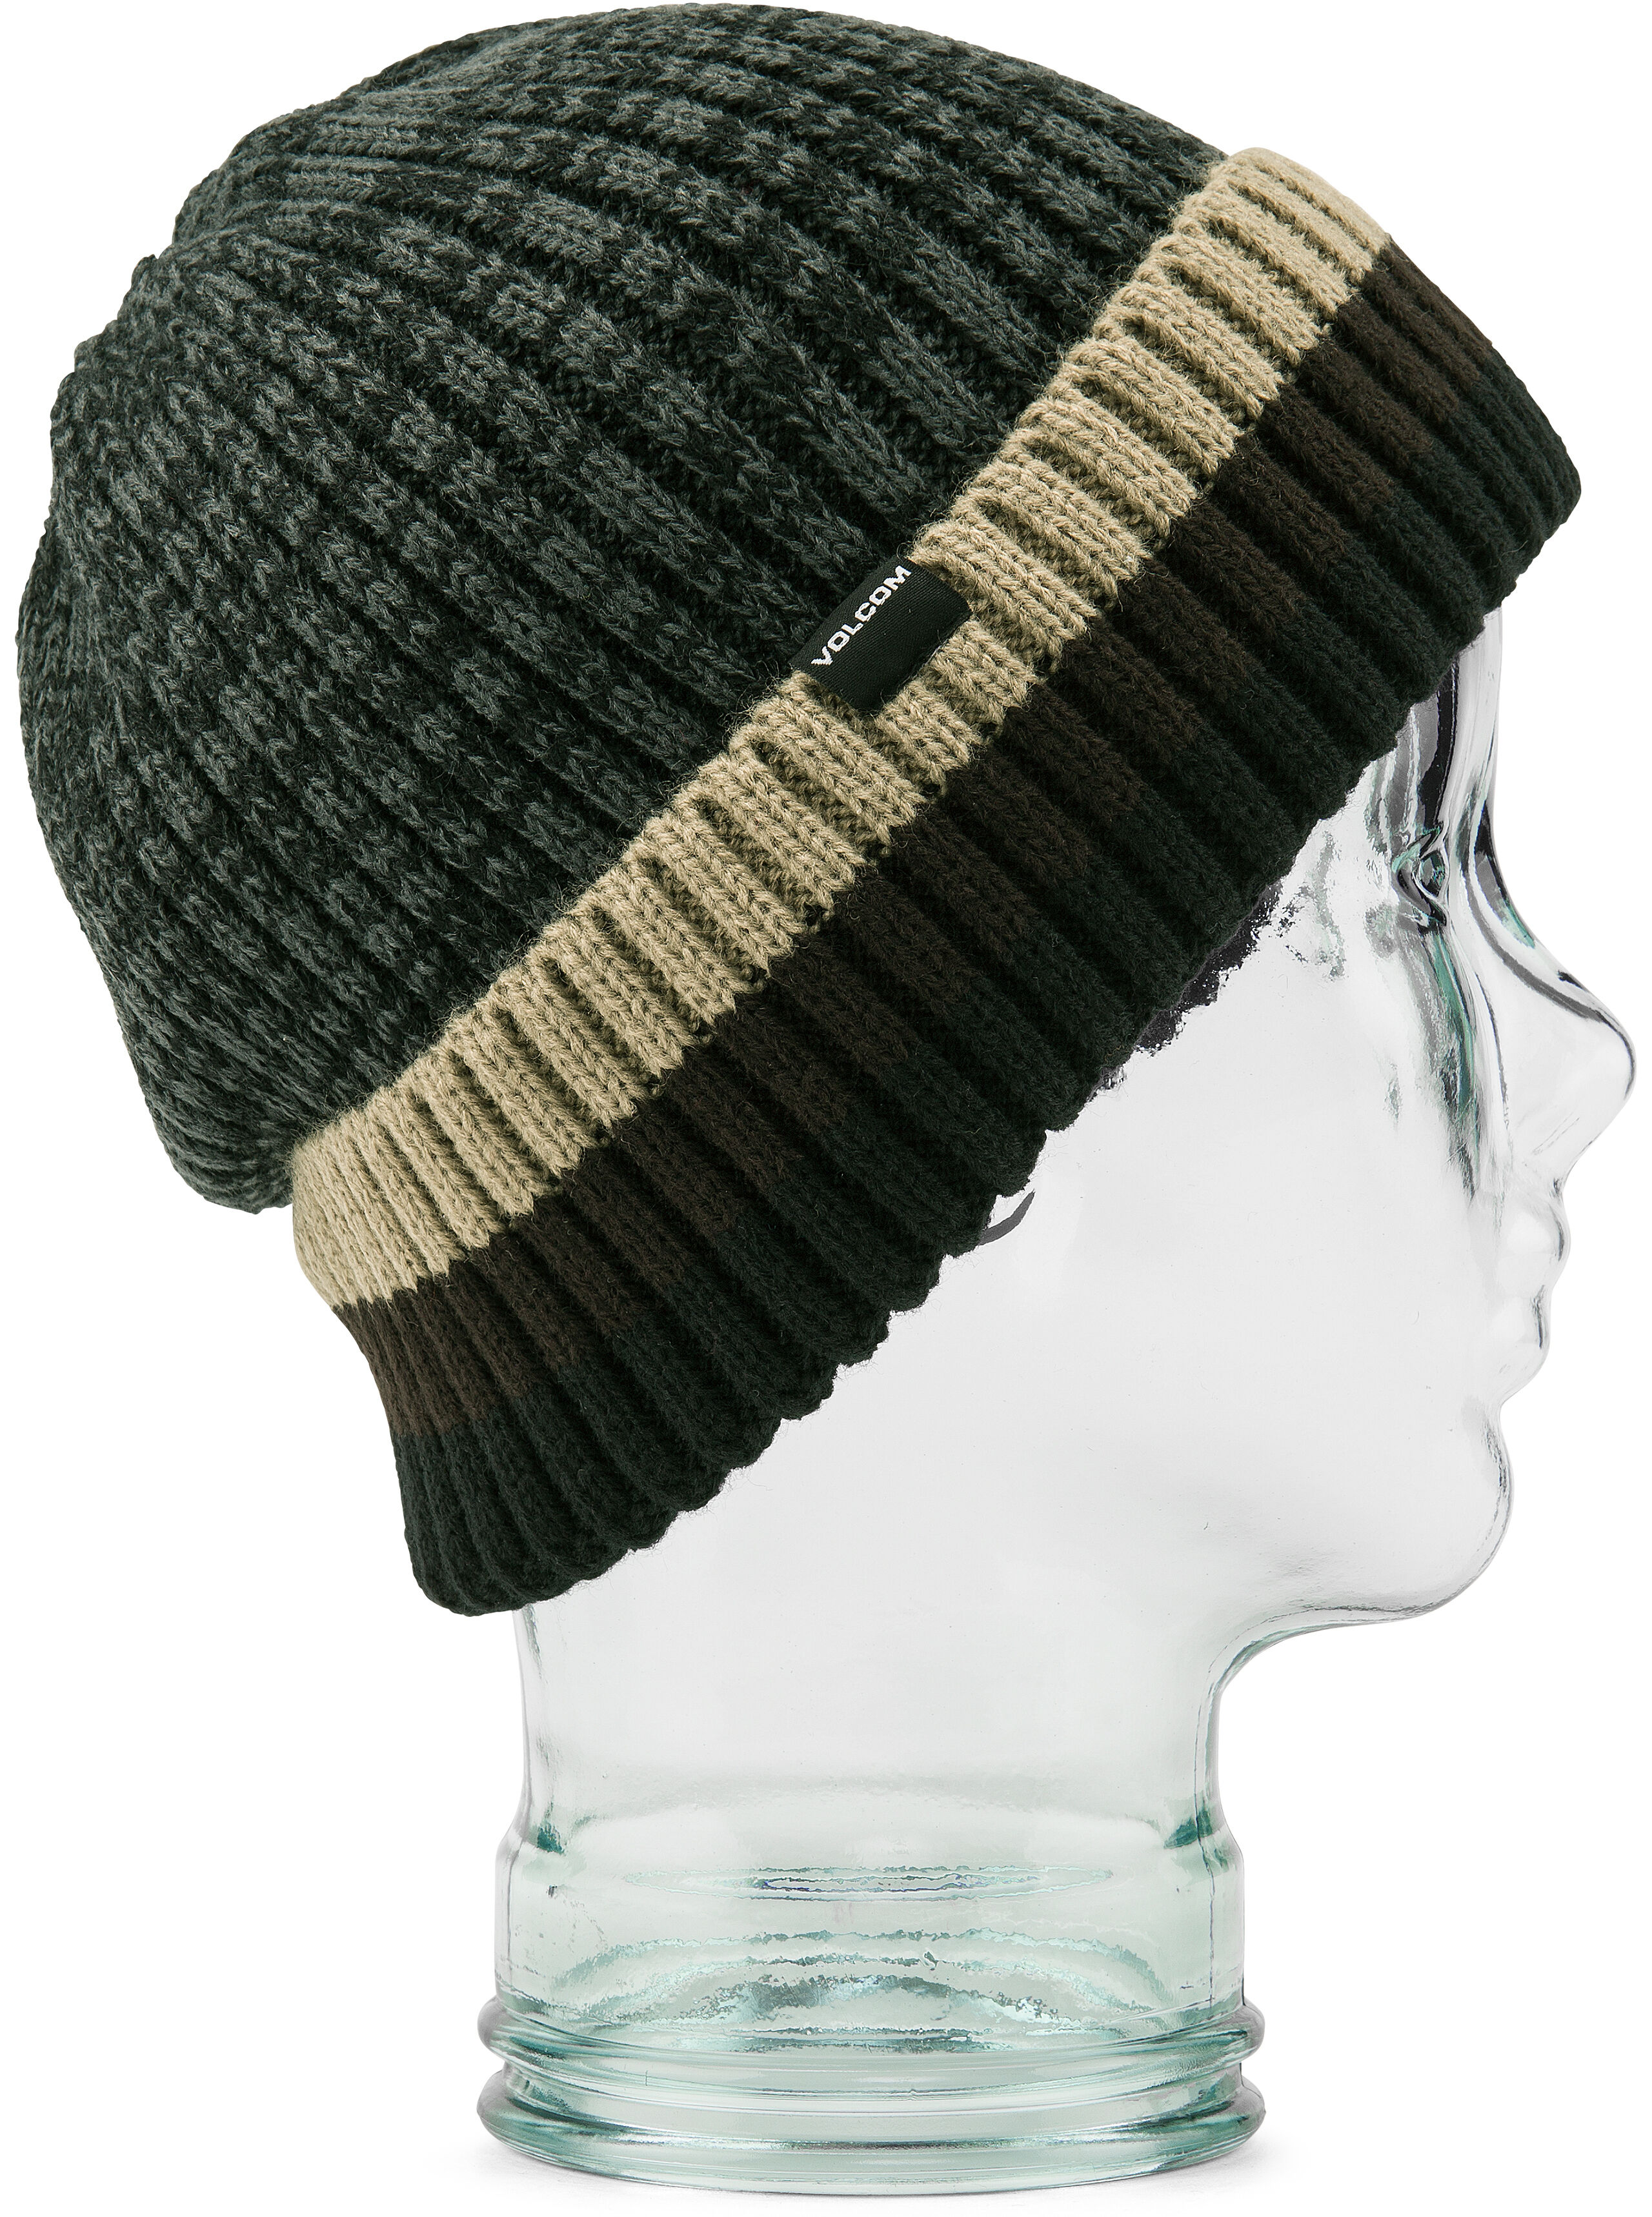 Volcom EVERYTHING BEANIE BROWN One Size